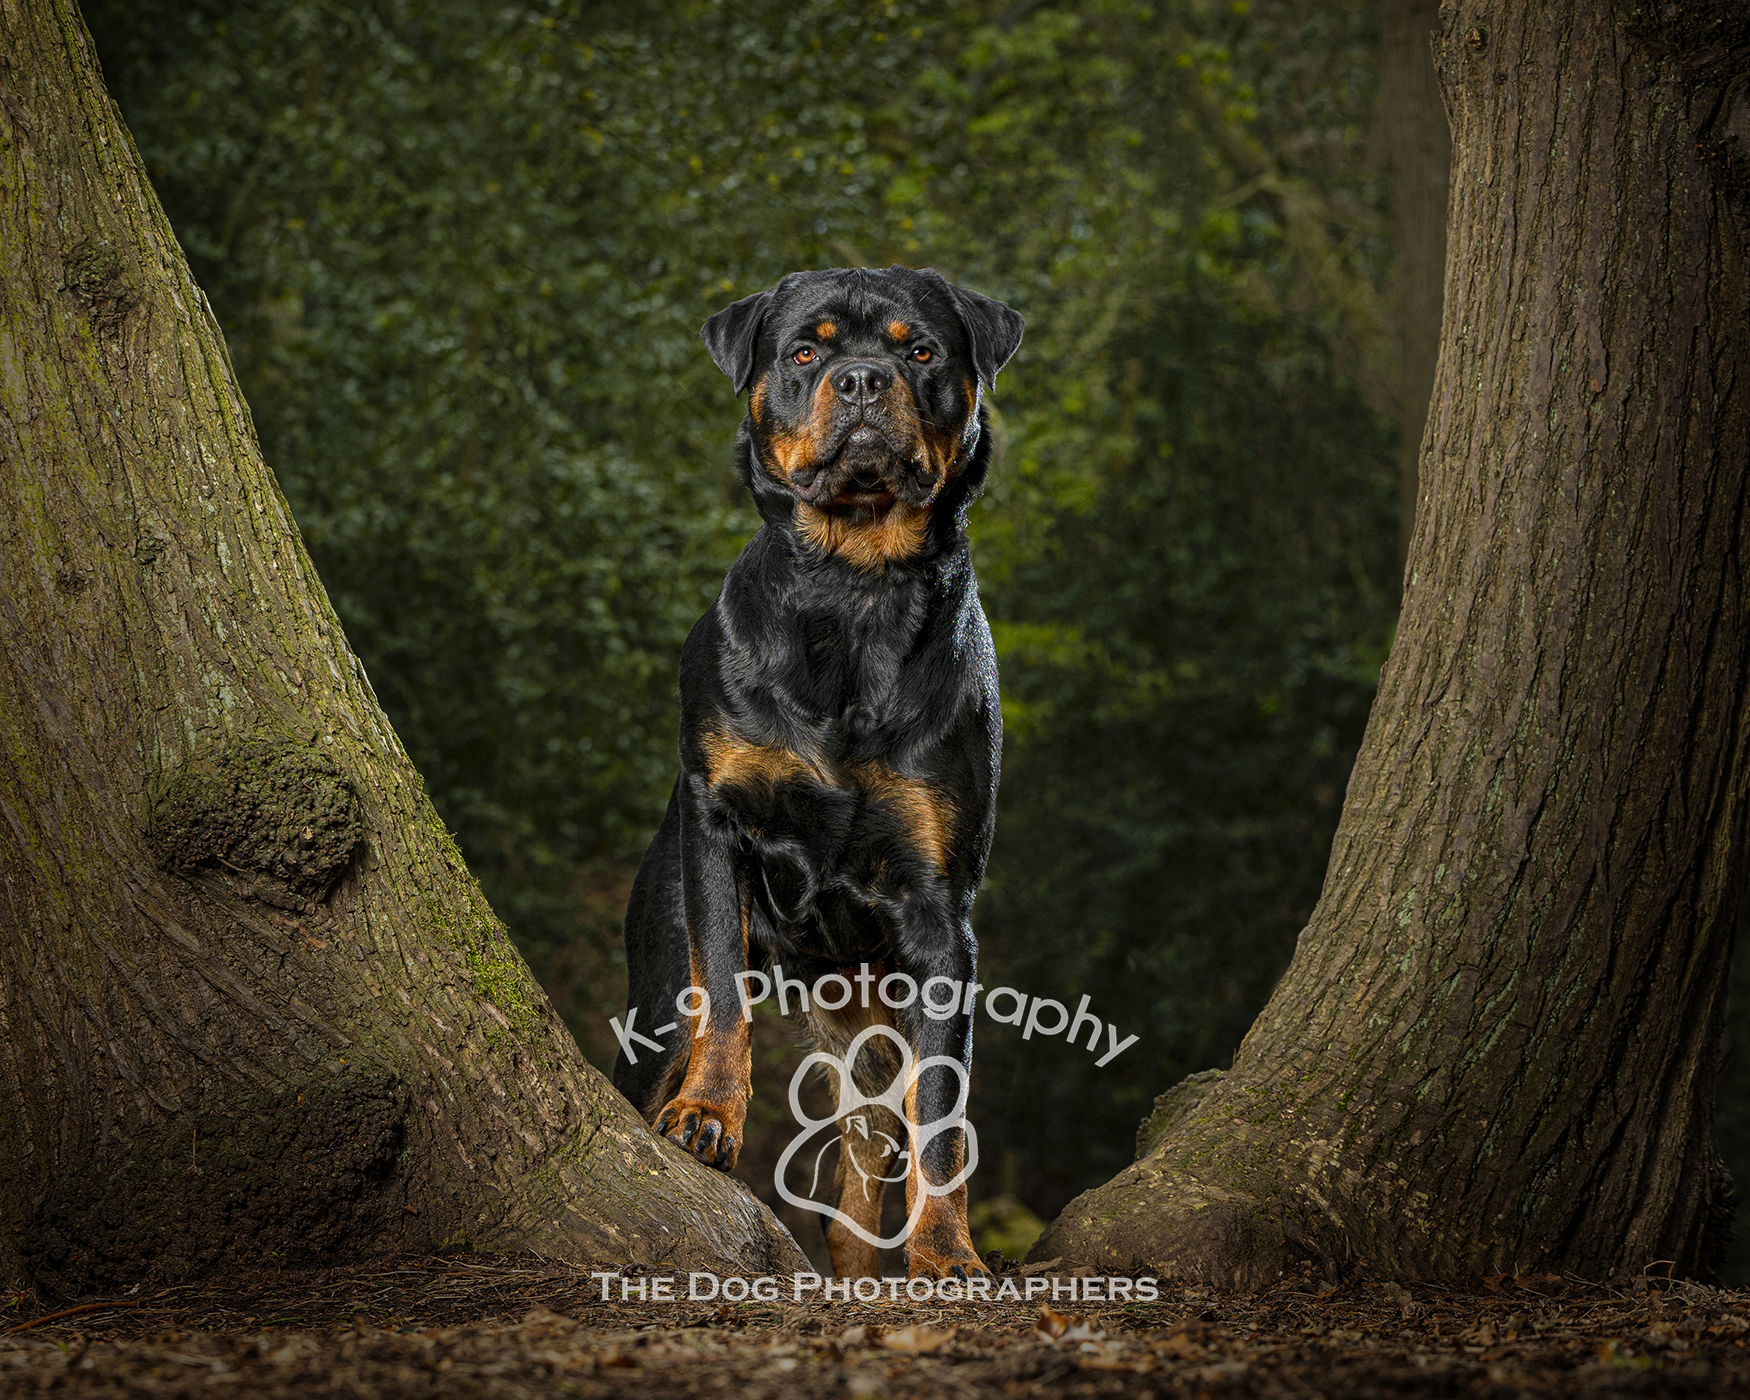 Dog photography of a dog behind a tree